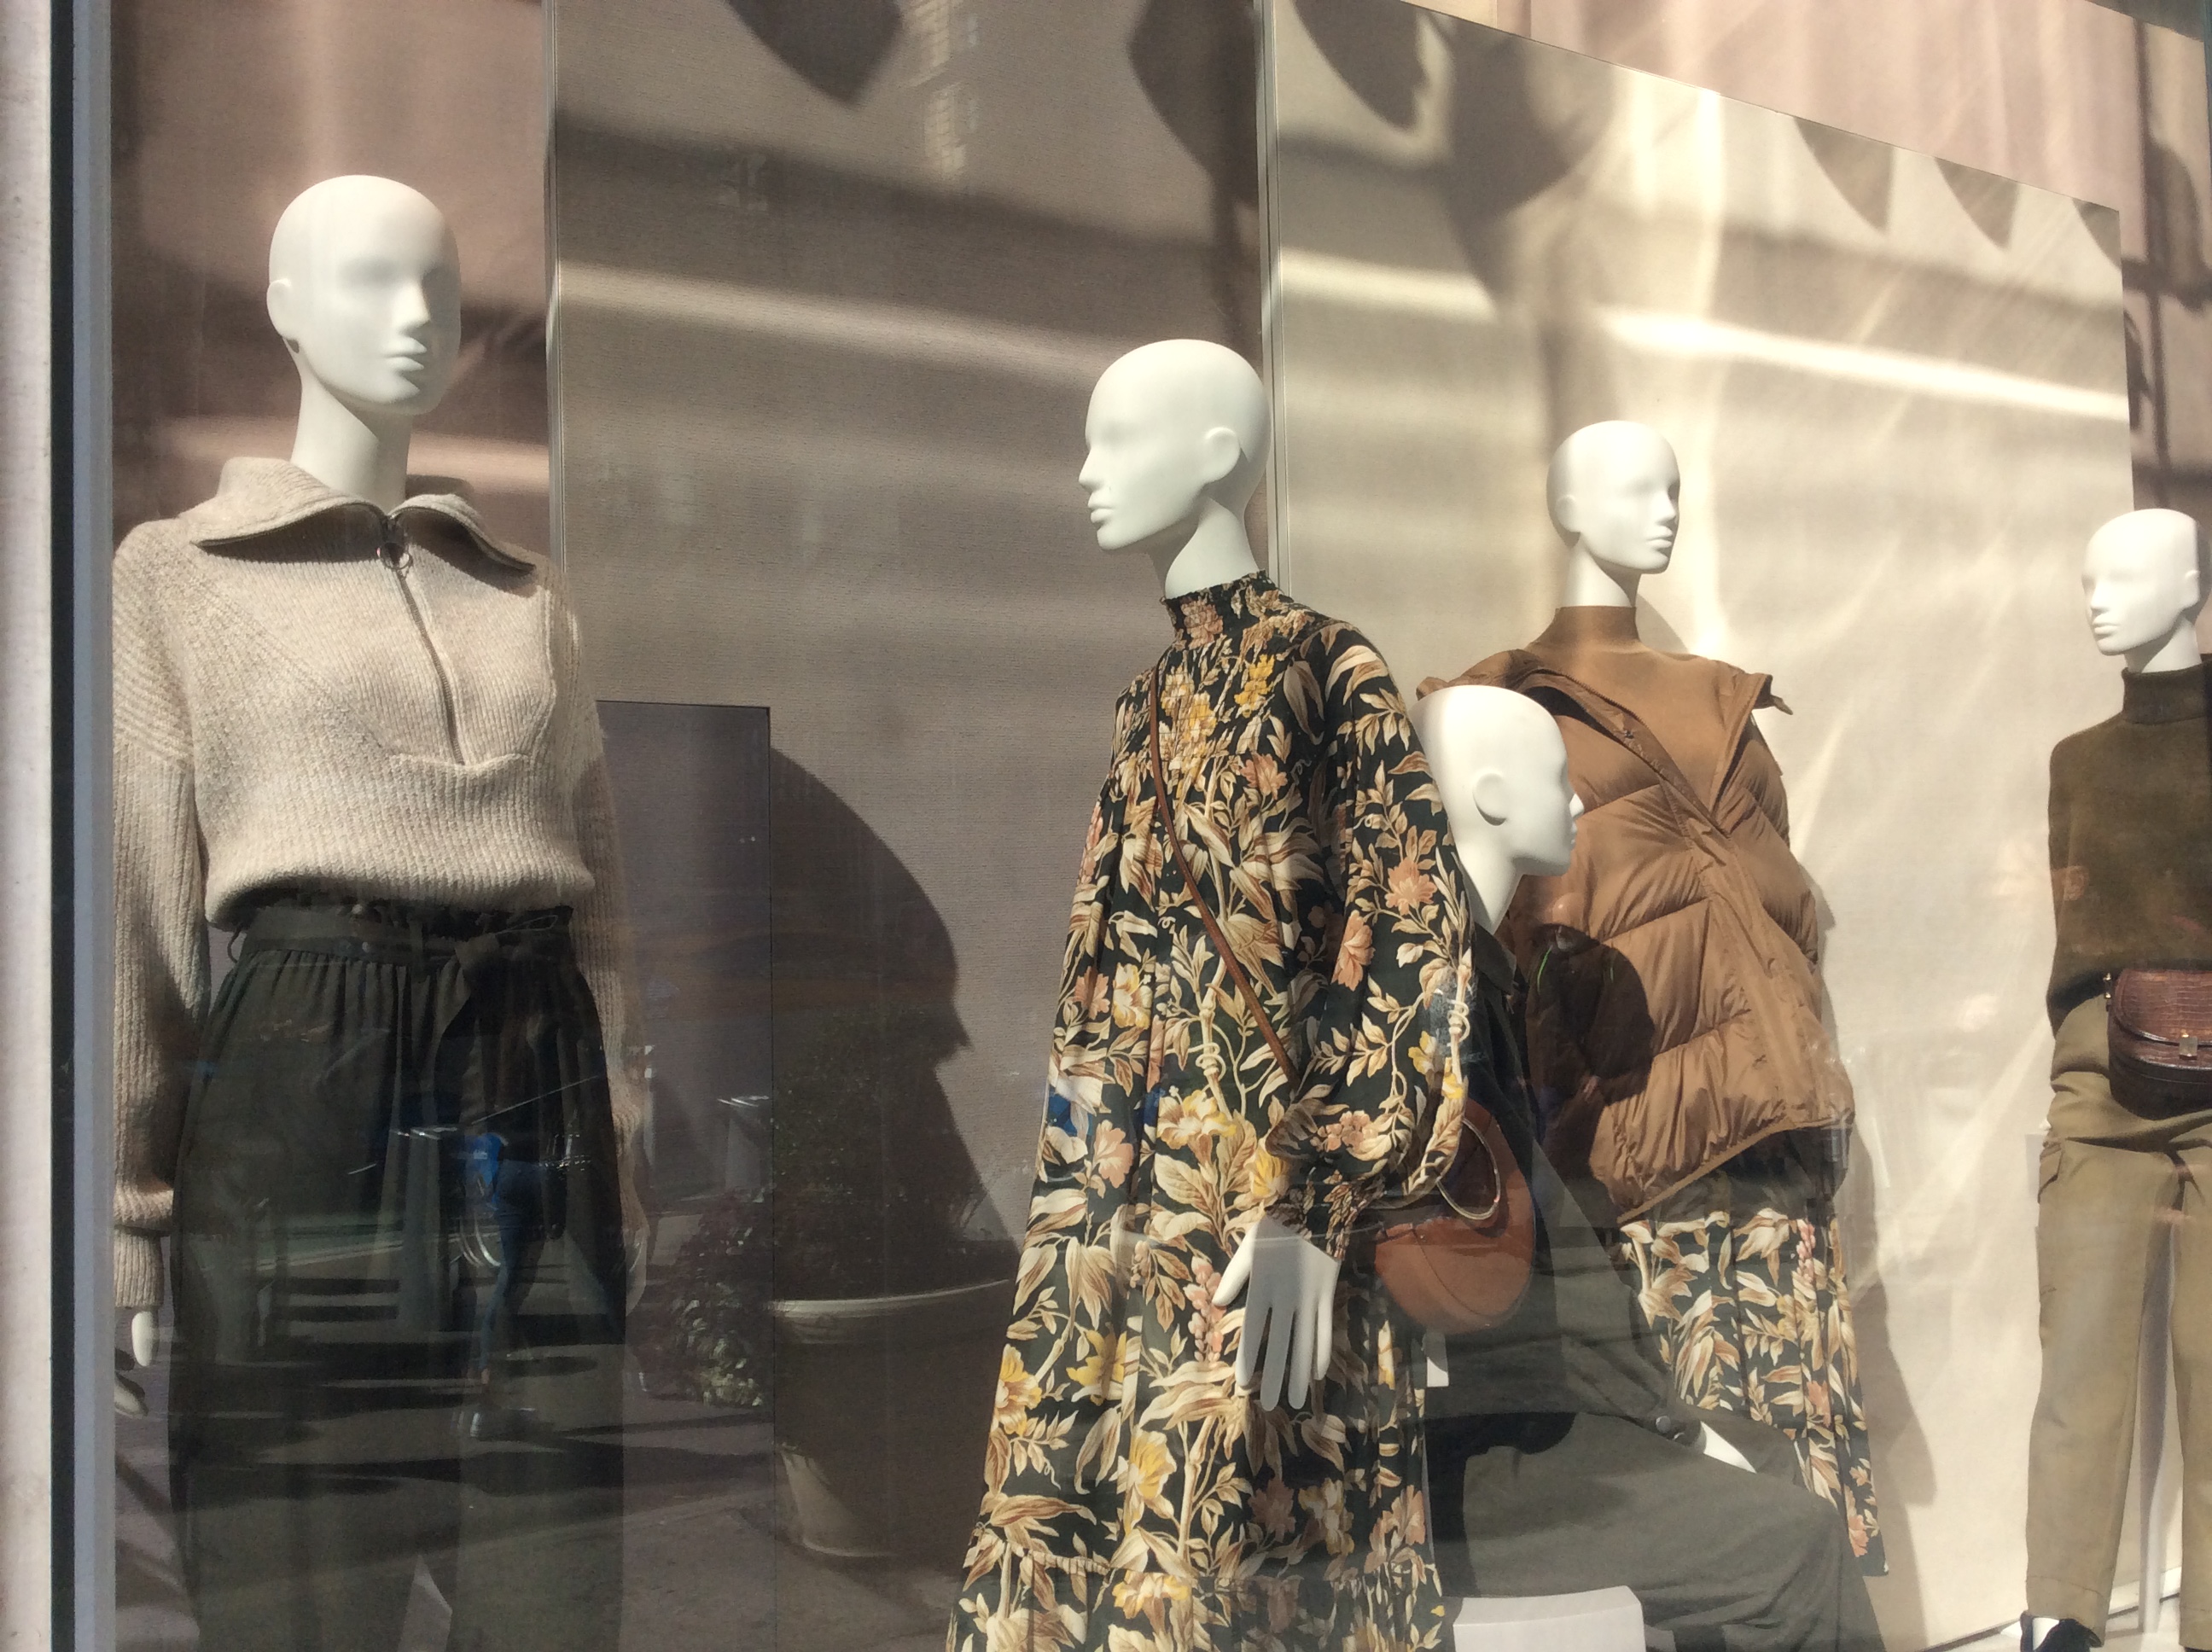 Resist, Reject, Rebel: Protesting All-White Mannequins, News